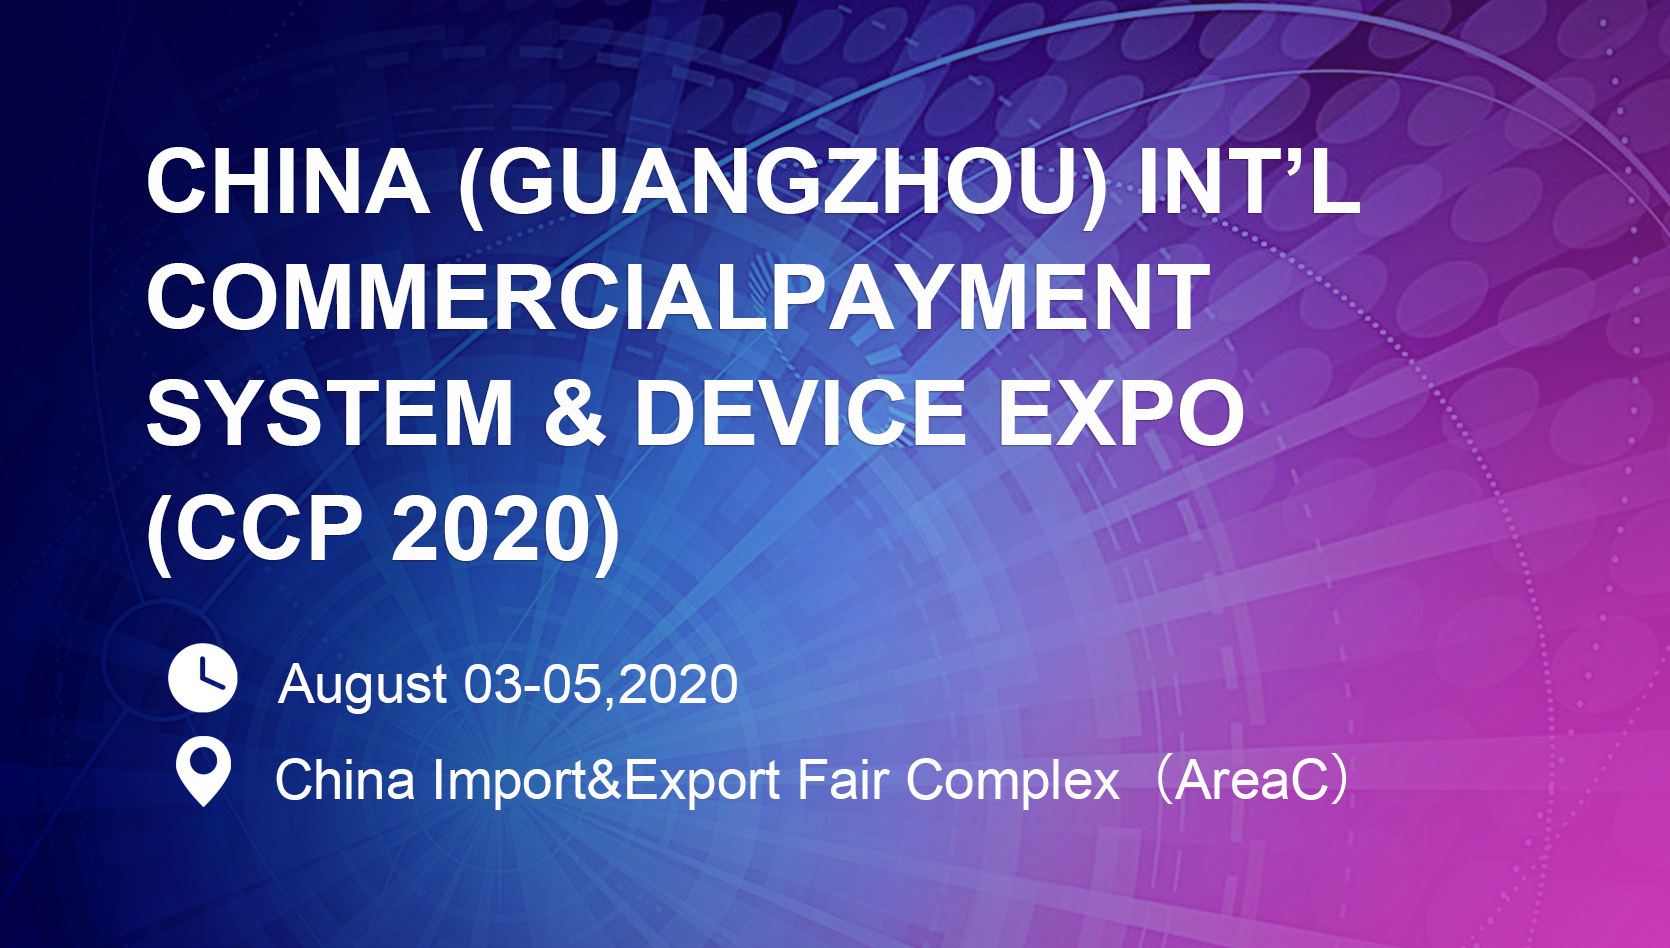 2020China (Guangzhou) International Commercial Payment System & Device Expo (CCP 2020)